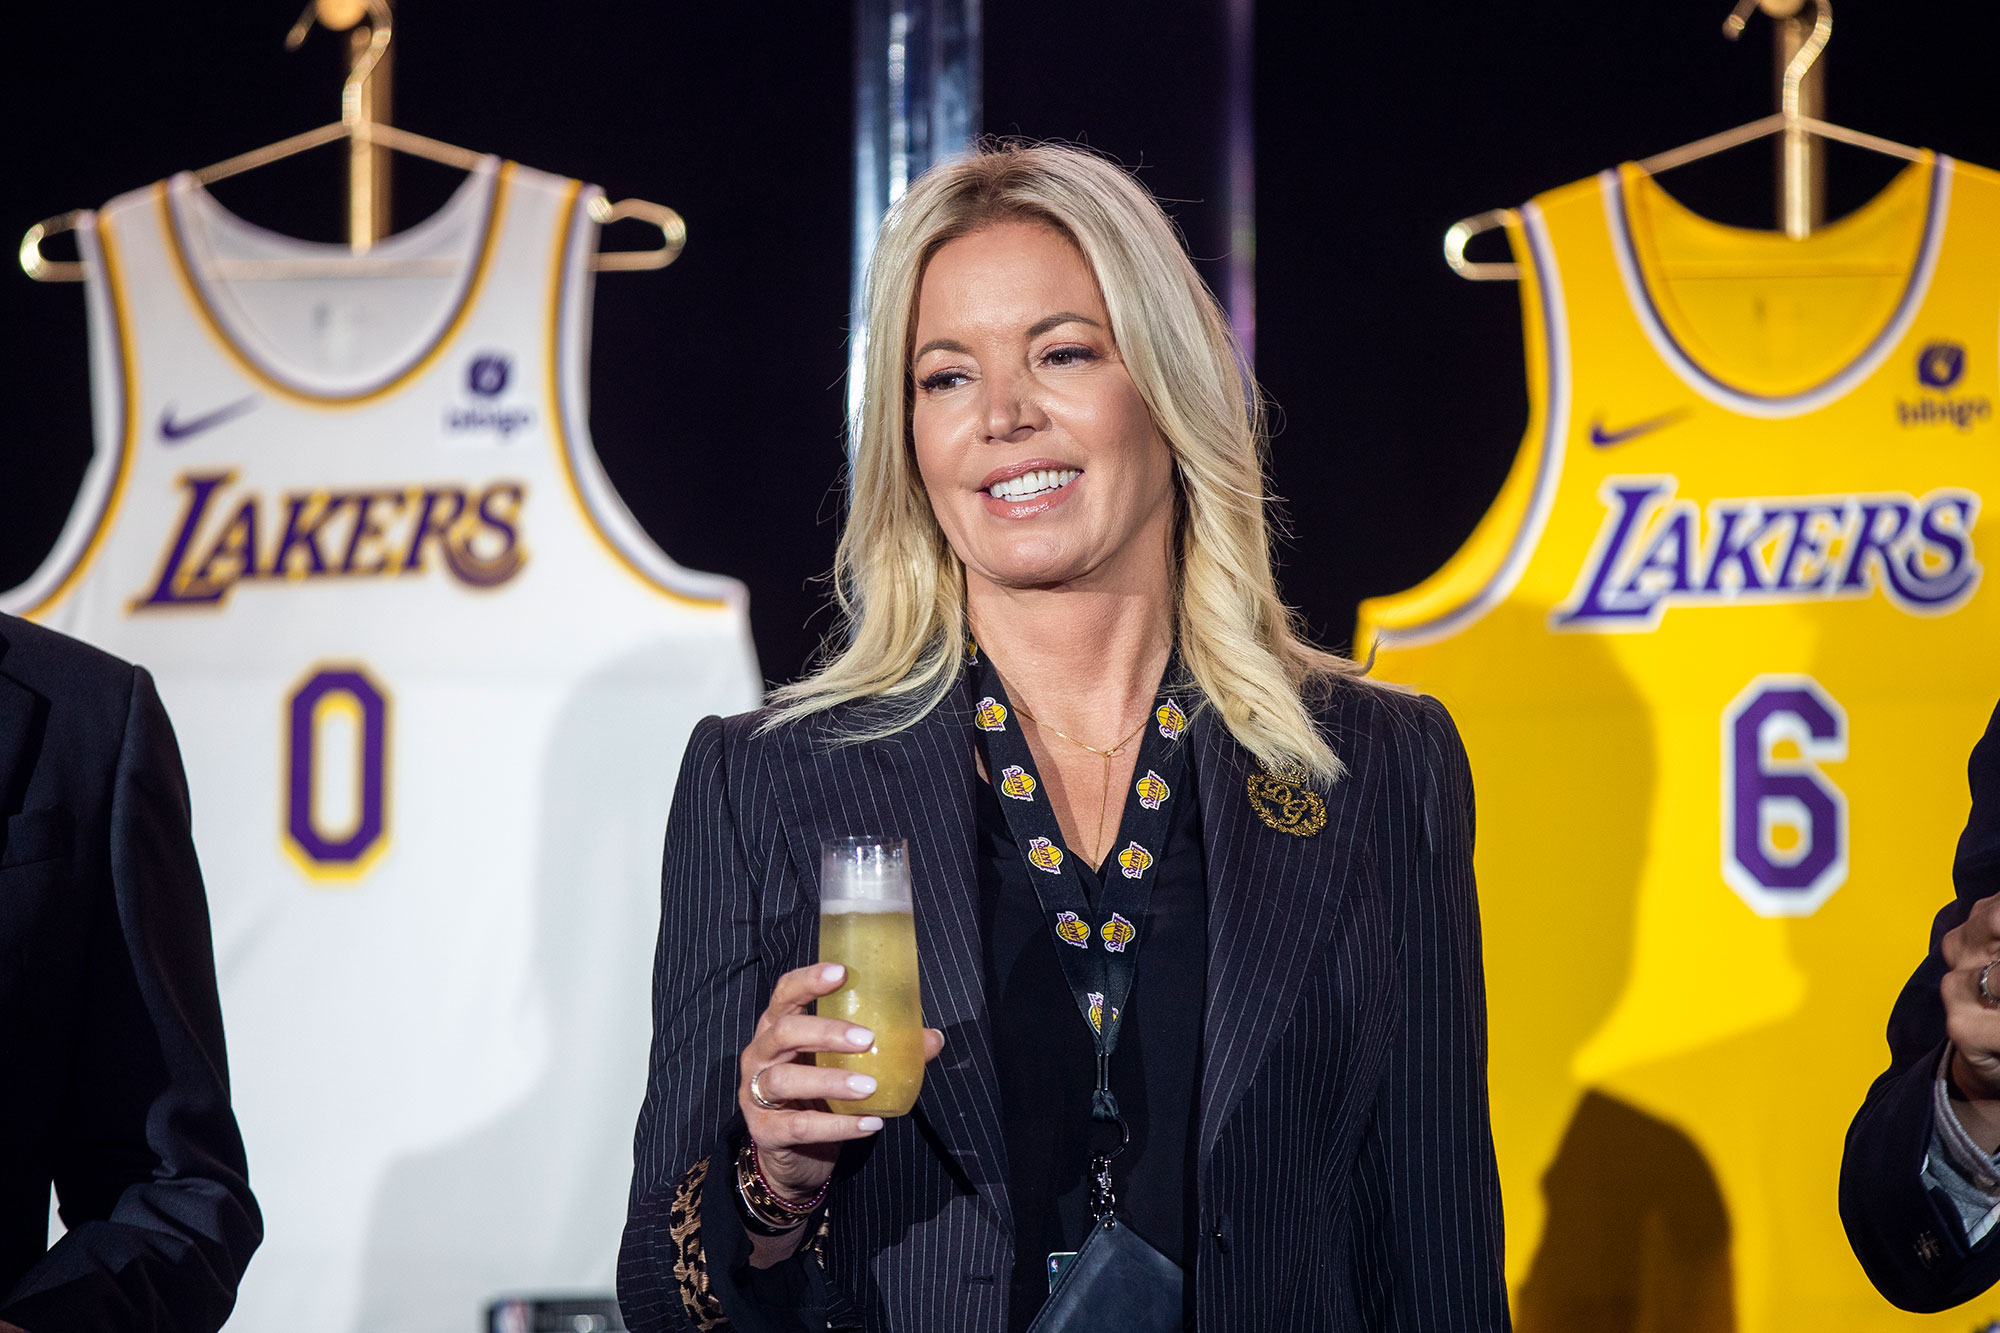 Inspiredlovers jeannie-buss-lakers-tweet-on-lebron-and-kobe-bryant Lakers Owner Jeanie Buss hit hard on Lebron James with her latest tweet as she.... NBA Sports  Russell Westbrook NBA News Lebron James Lakers owner Jeanie Buss Lakers News Kyrie Irving Kobe Bryant Jeanie Buss 